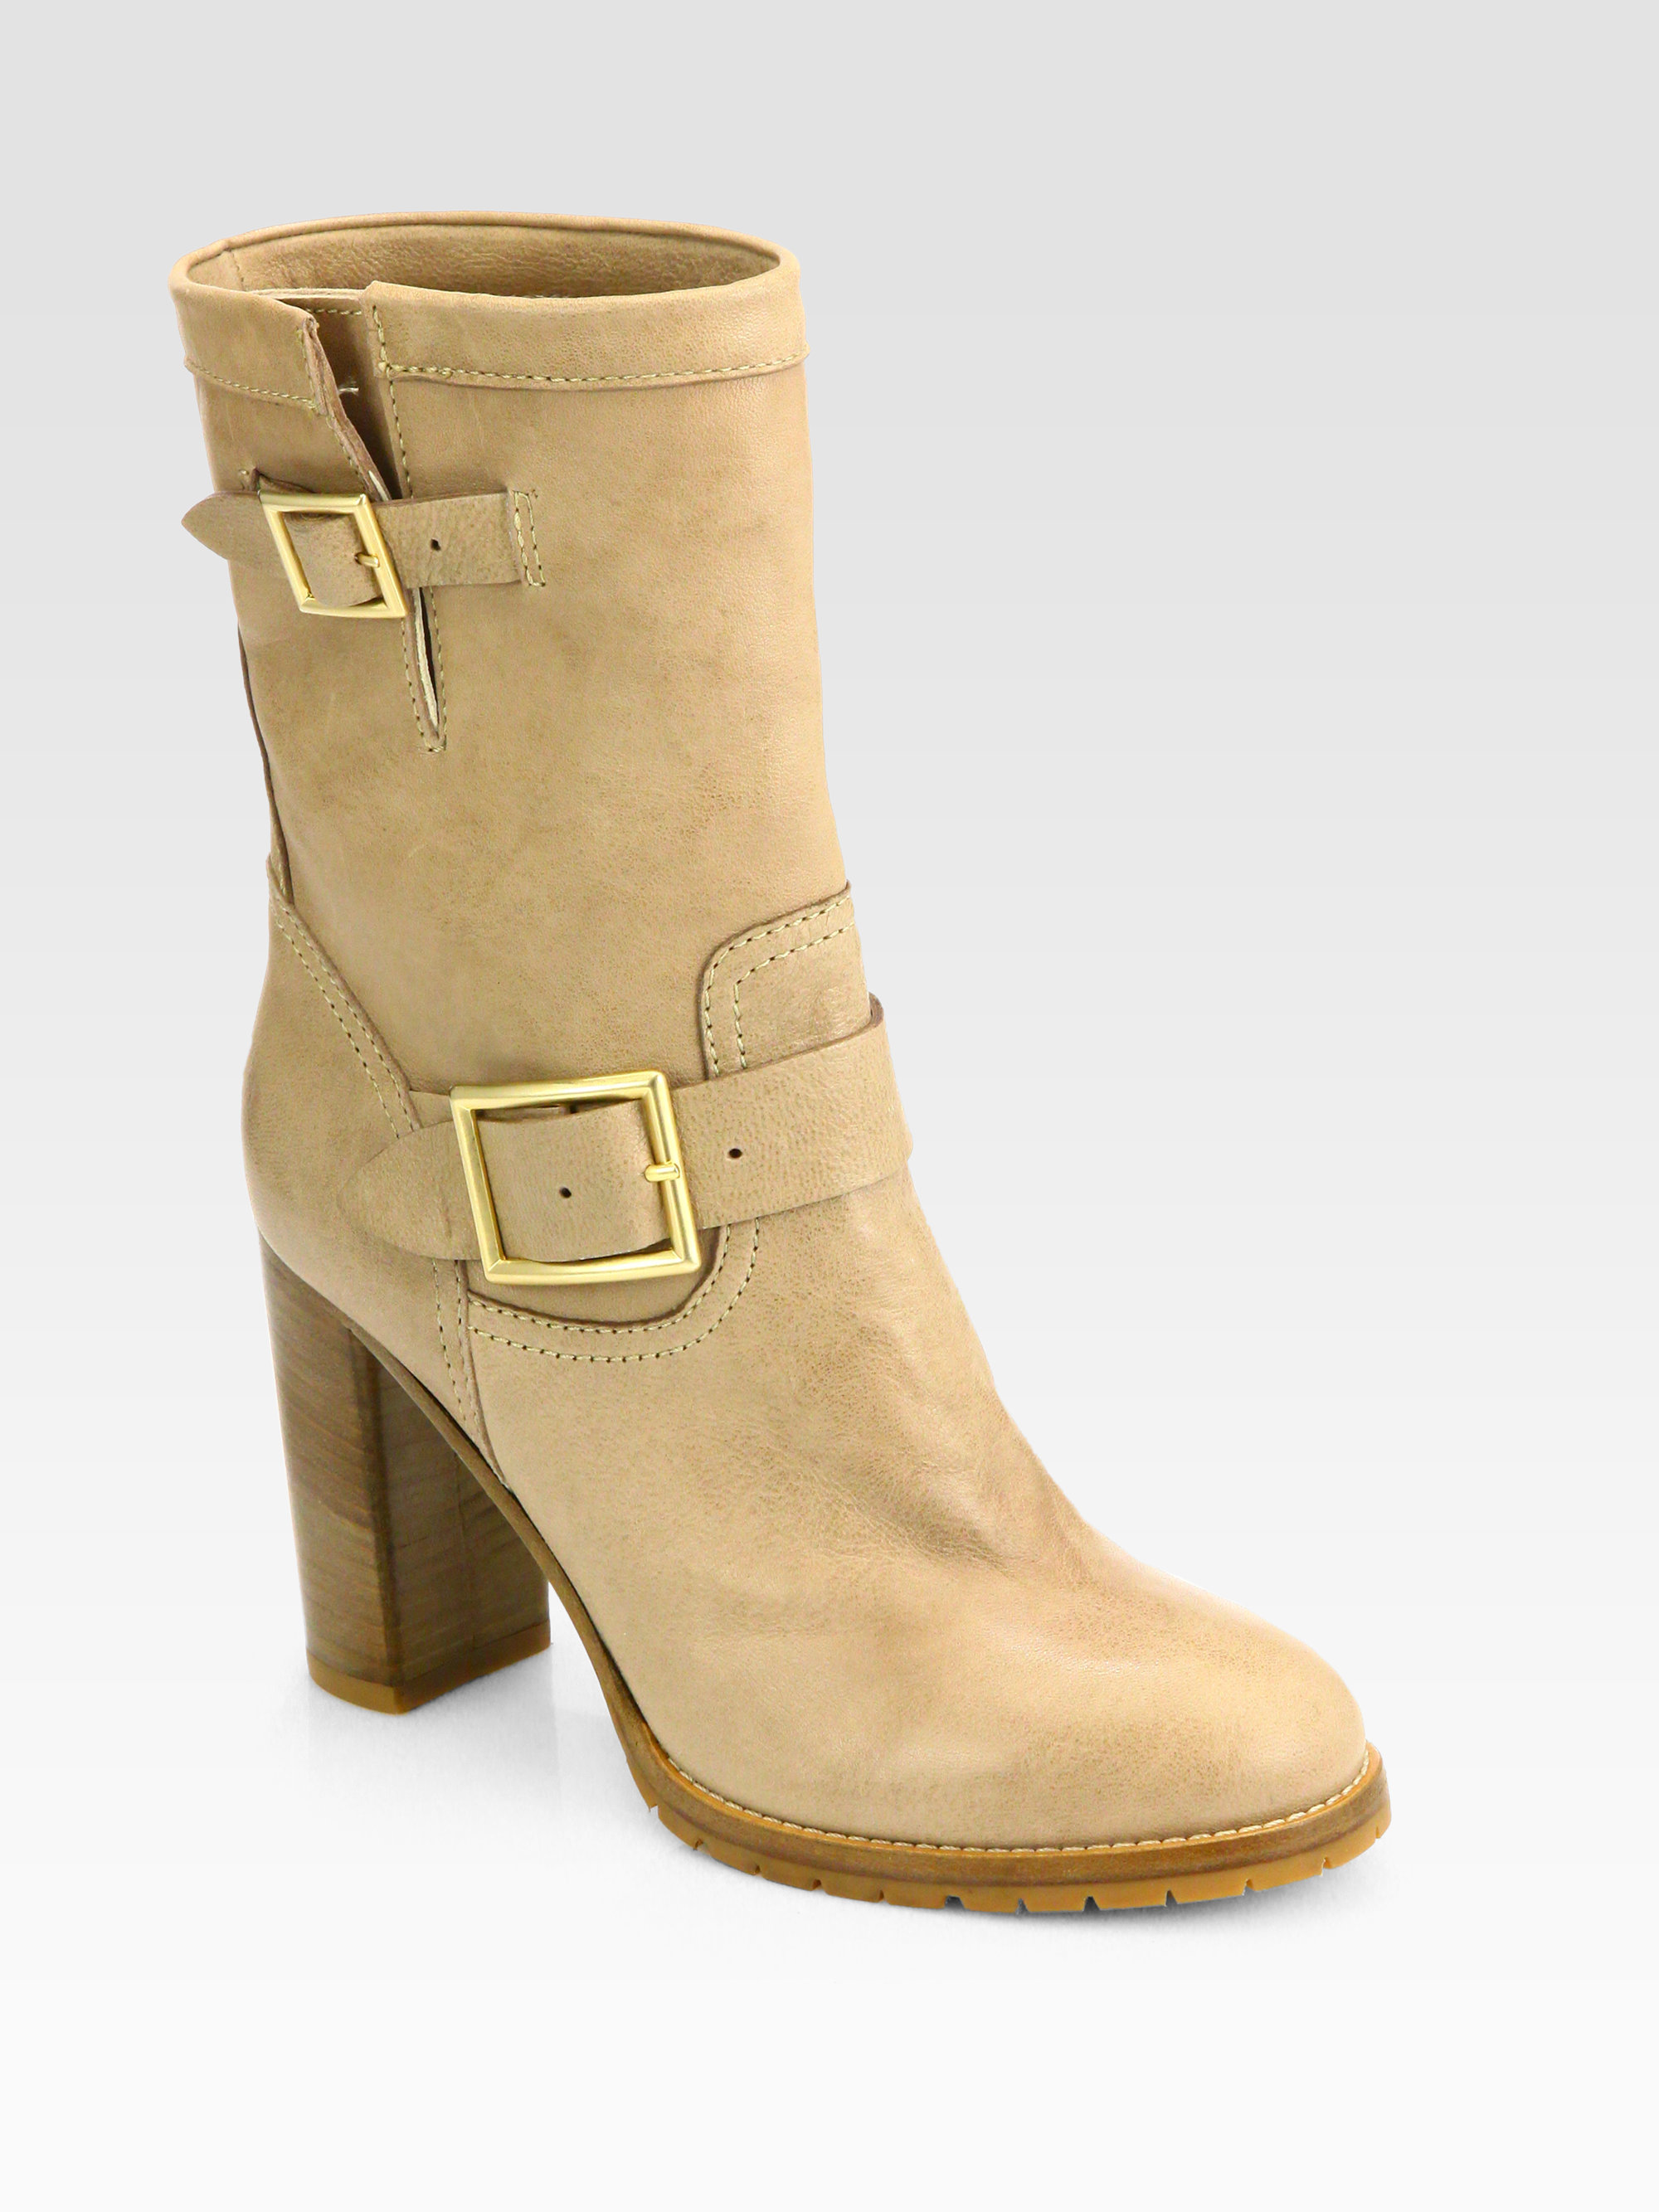 Jimmy choo Dart Leather Midcalf Boots in Natural | Lyst